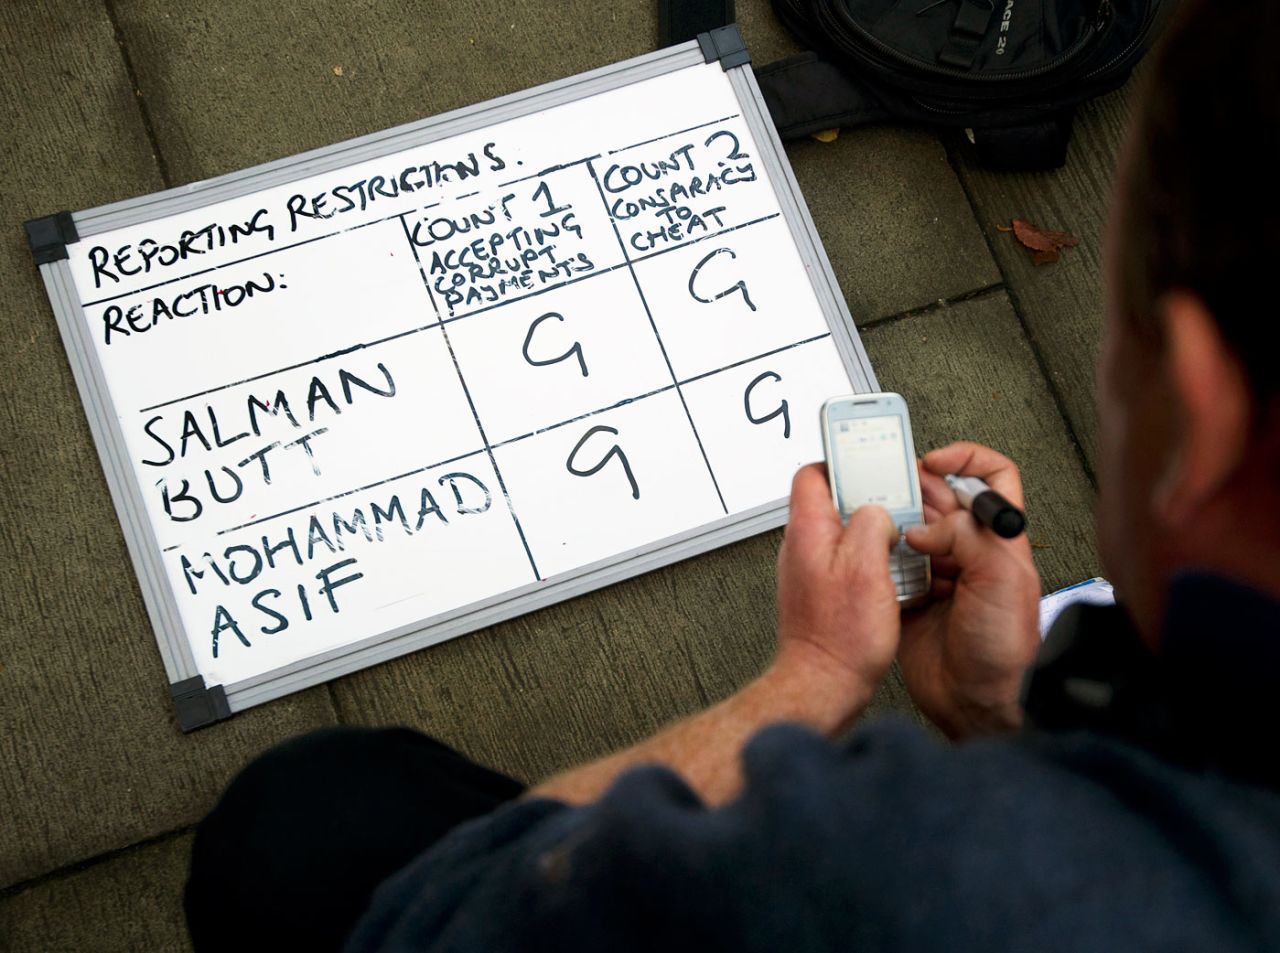 A reporter waits for a text update next to whiteboard indicating guilty verdicts for Salman Butt and Mohammad Asif outside the Southwark Crown Court in London, November 1, 2011